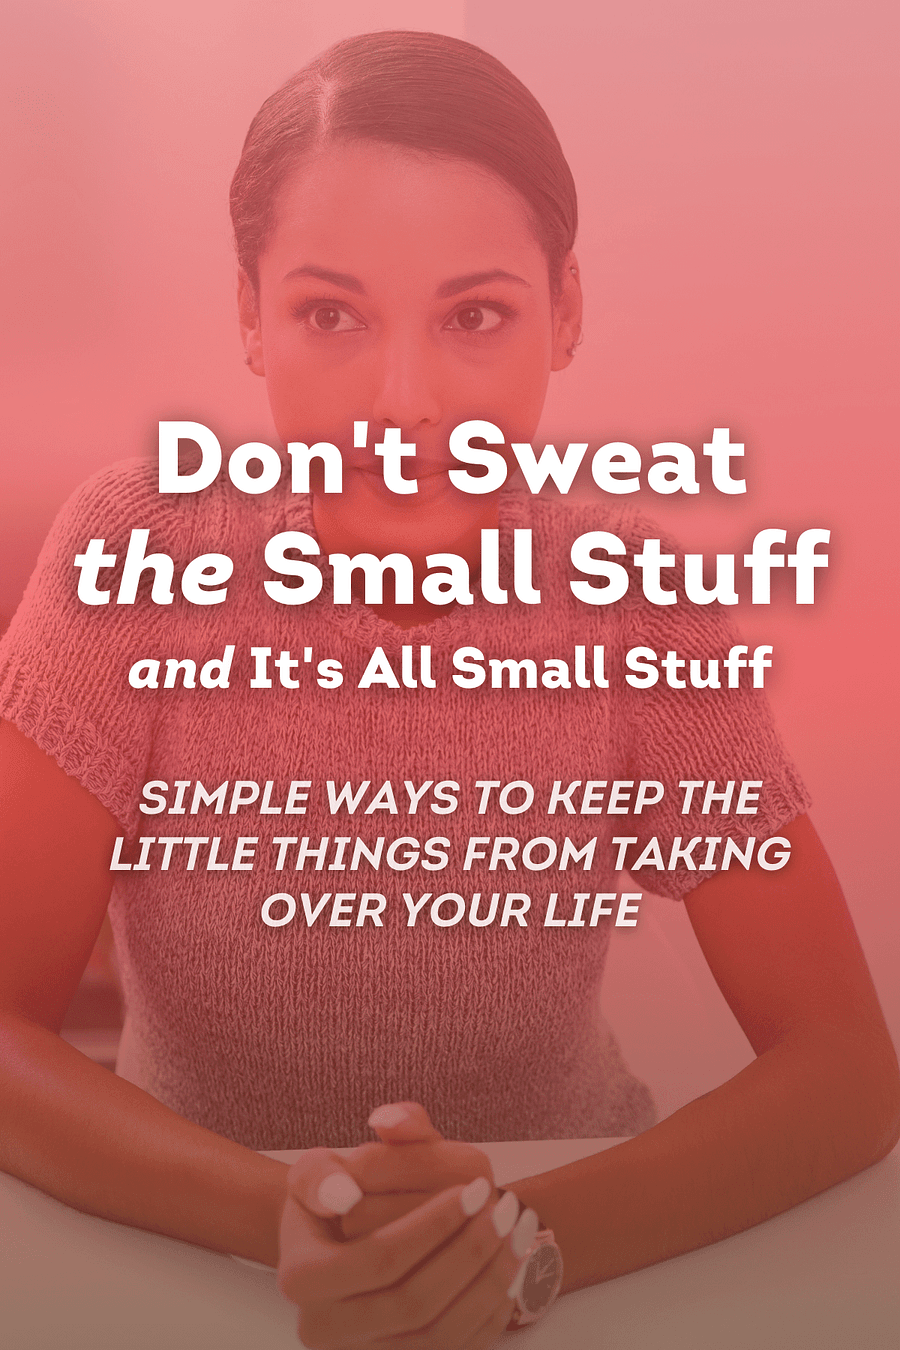 Don't Sweat the Small Stuff and It's All Small Stuff by Richard Carlson - Book Summary